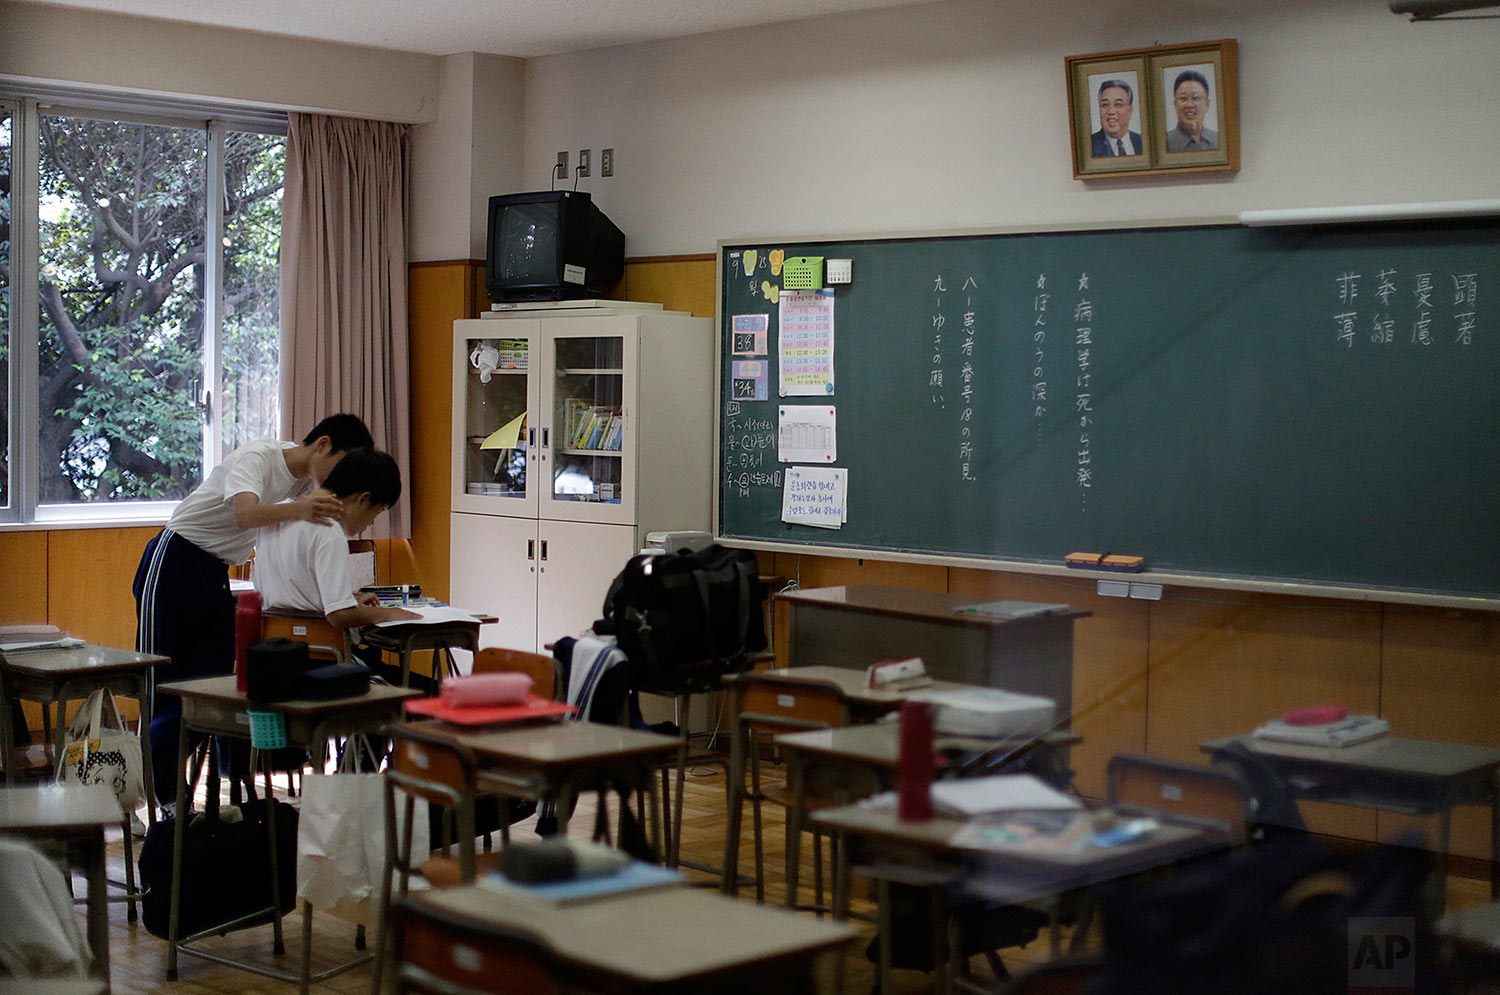  In this Sept. 26, 2017, photo, students study in a classroom at a senior high school in Tokyo.  (AP Photo/Eugene Hoshiko) 